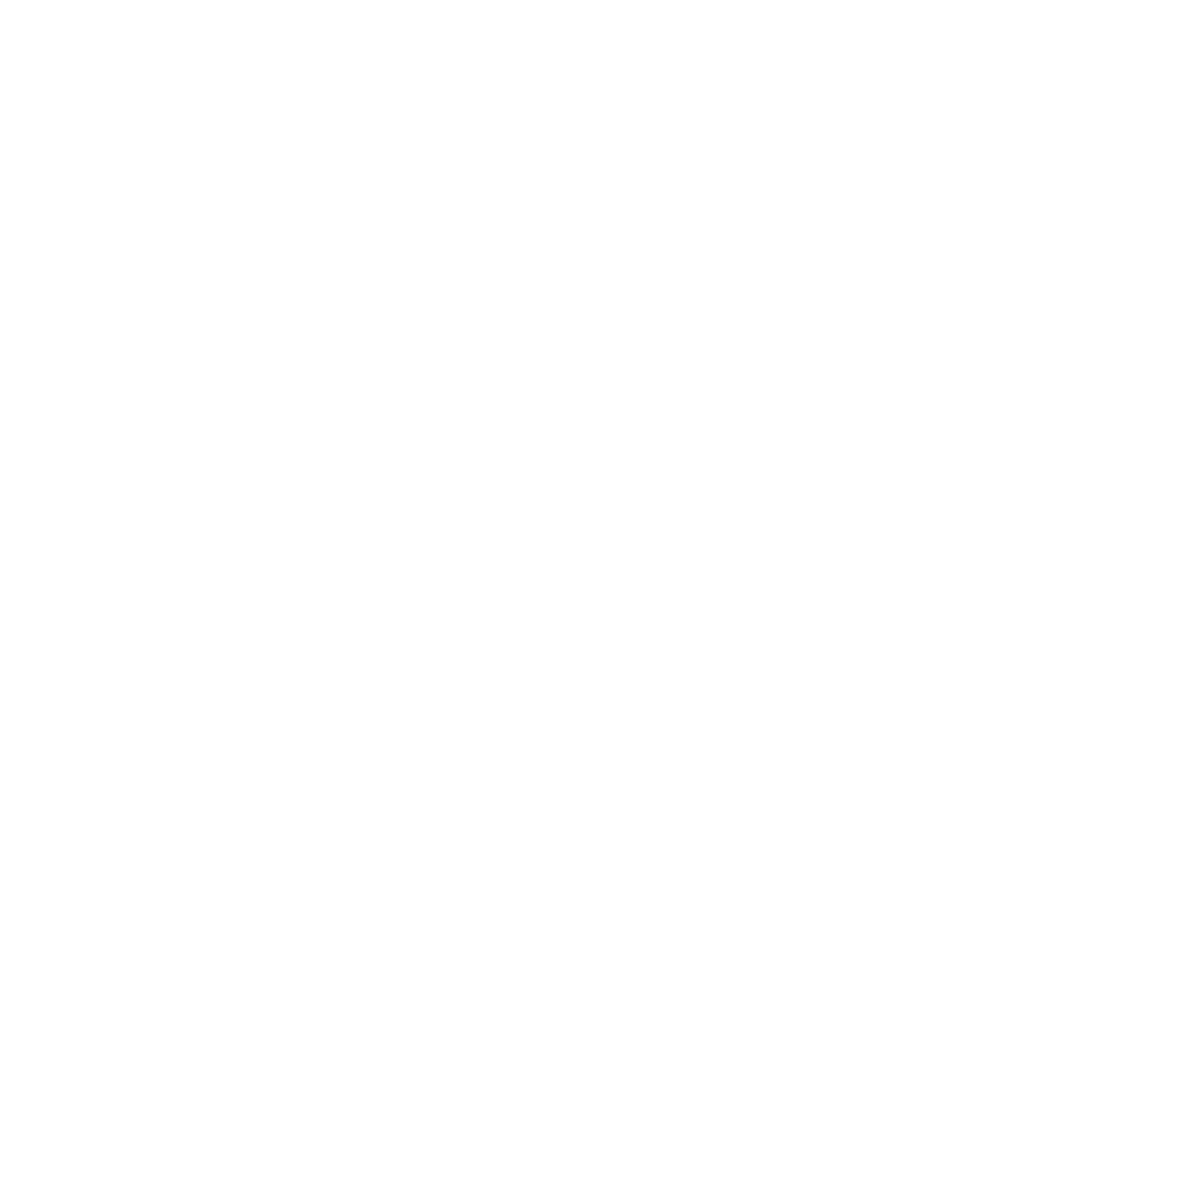 Linked(1200).png